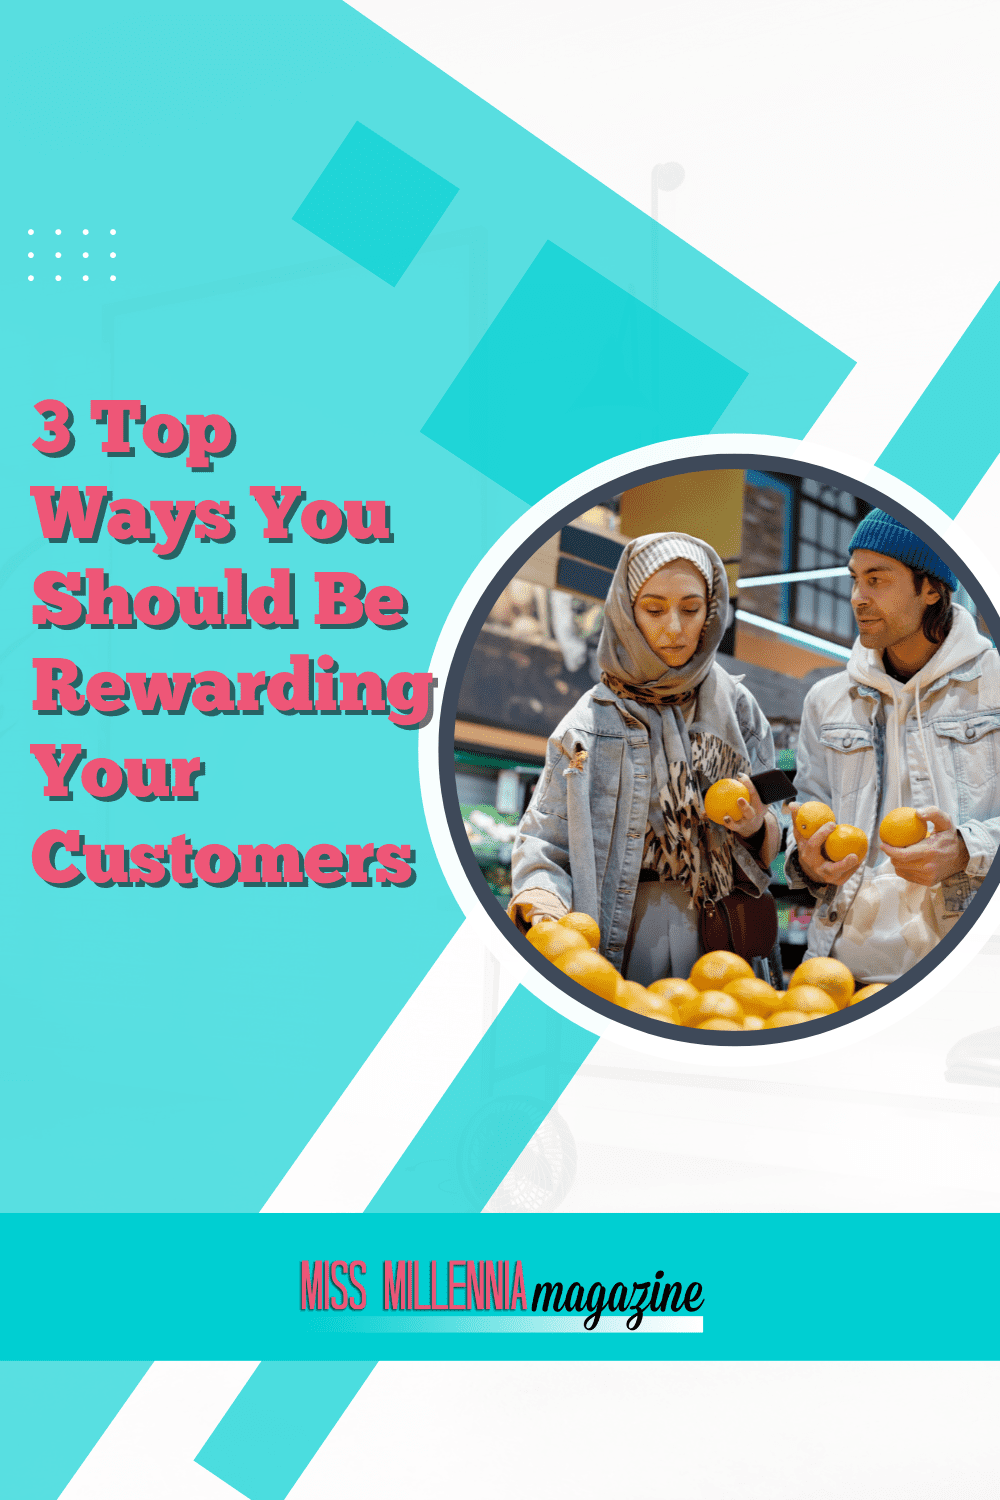 3 Top Ways You Should Be Rewarding Your Customers